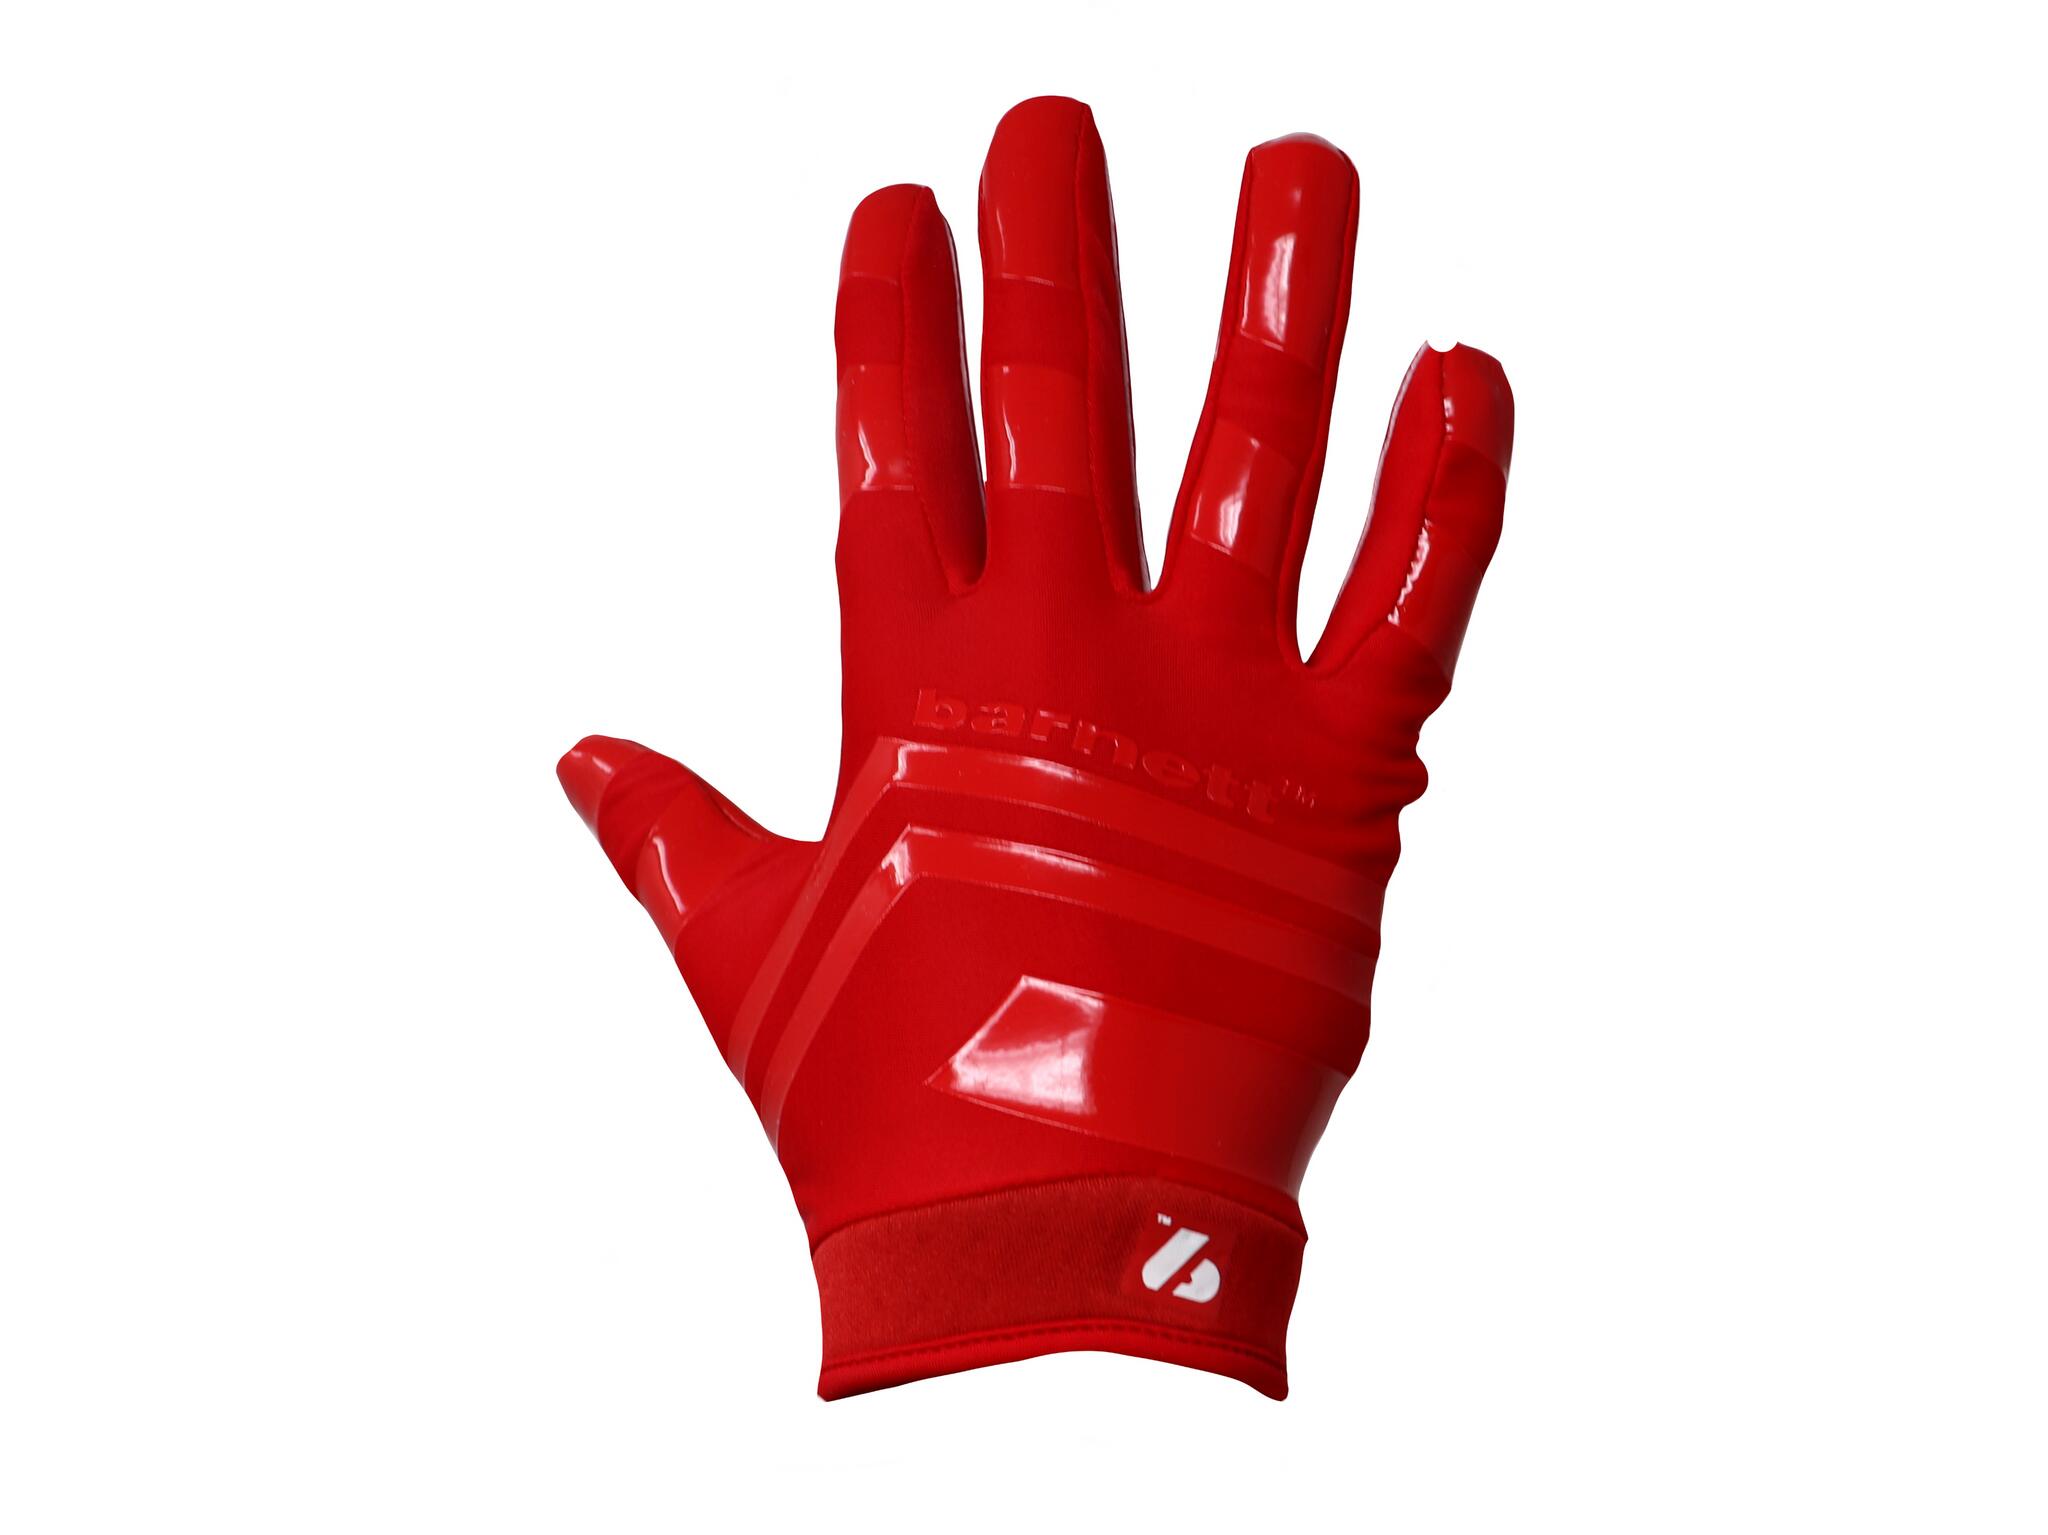  pro receiver American football gloves, RE, DB, RB, Red FRG-03 2/3